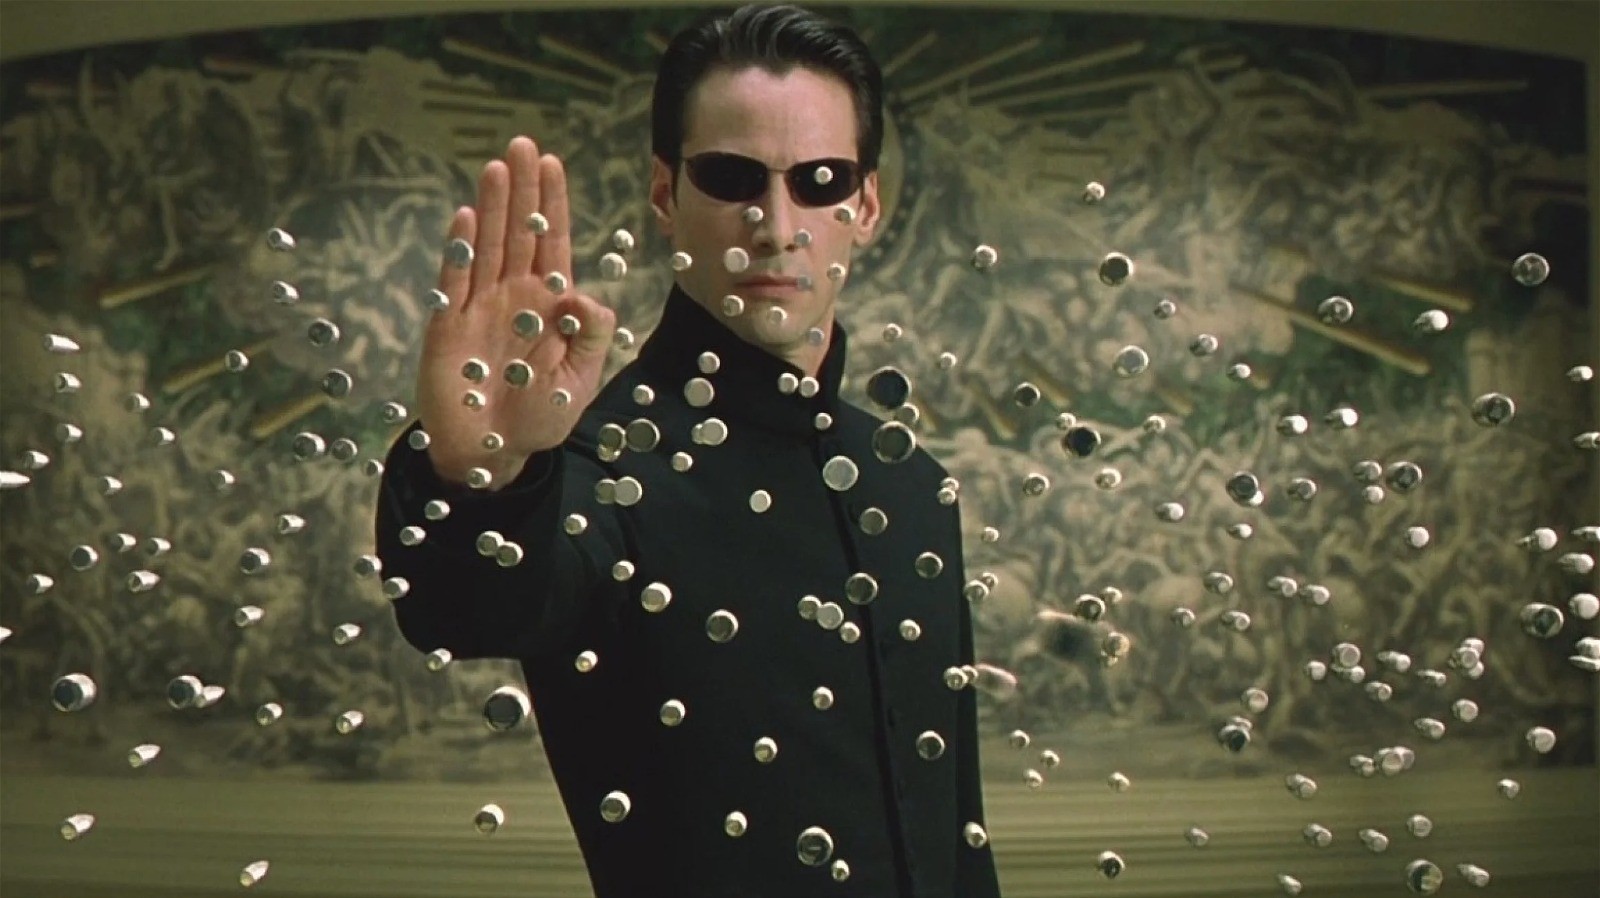 A still from The Matrix Reloaded